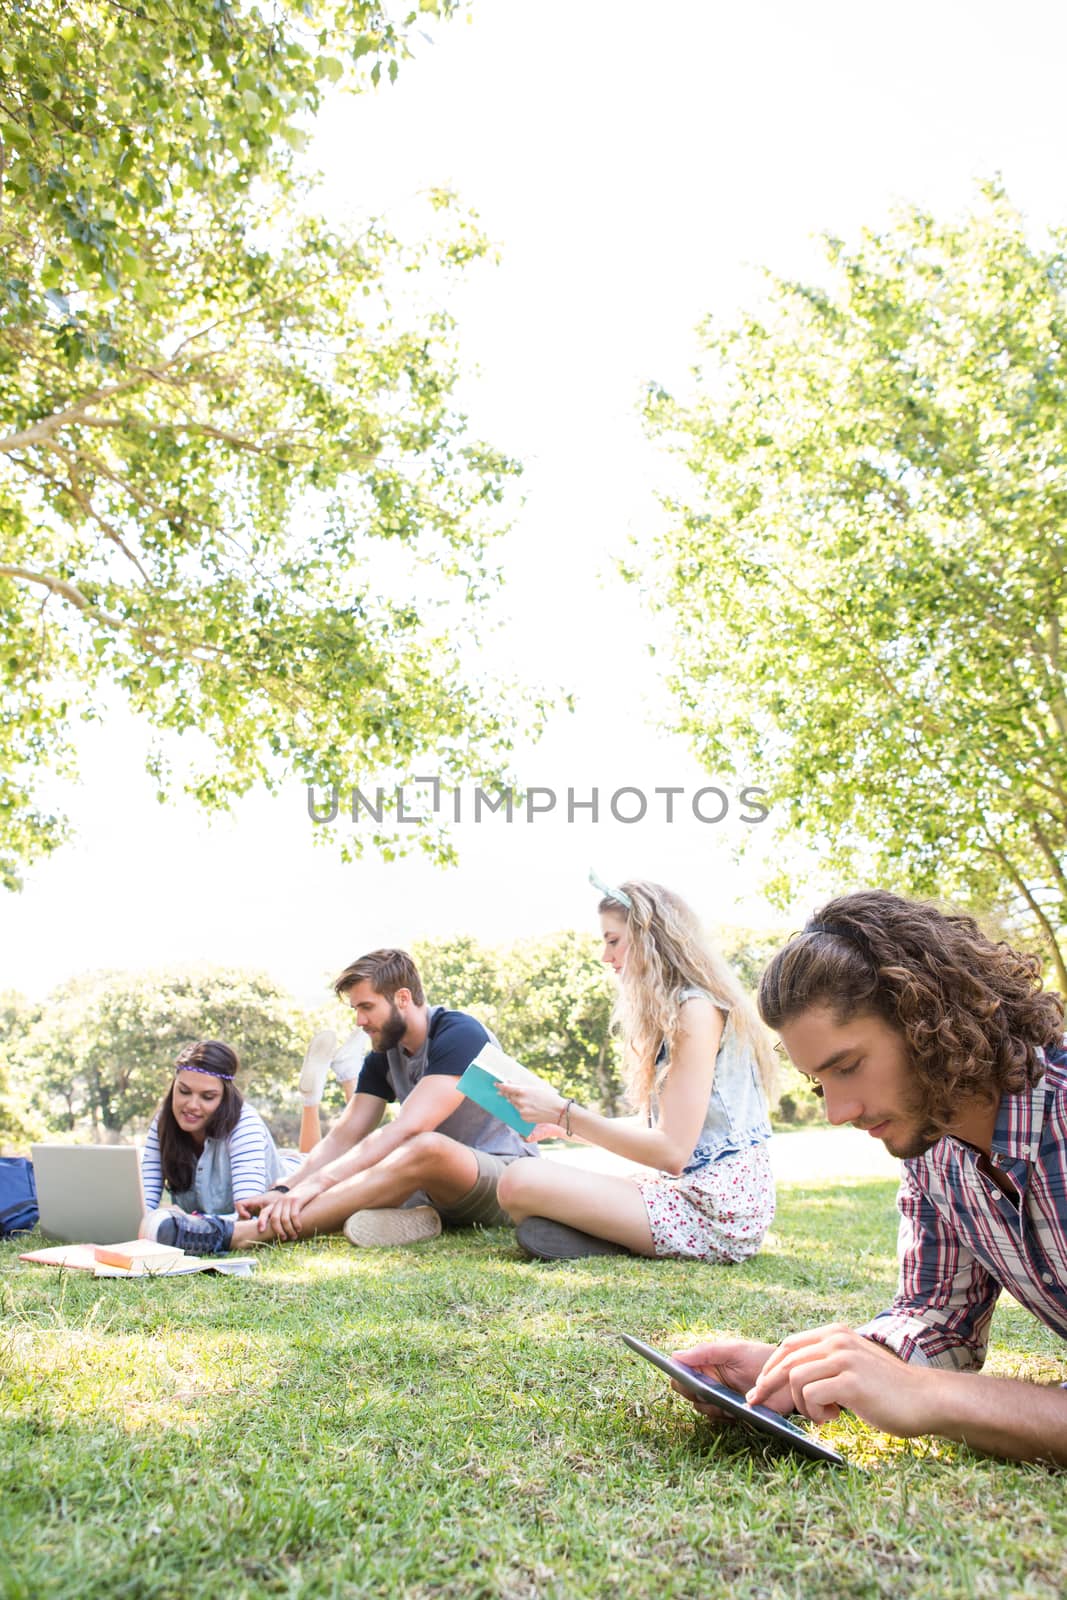 Classmates revising together on campus on a summers day